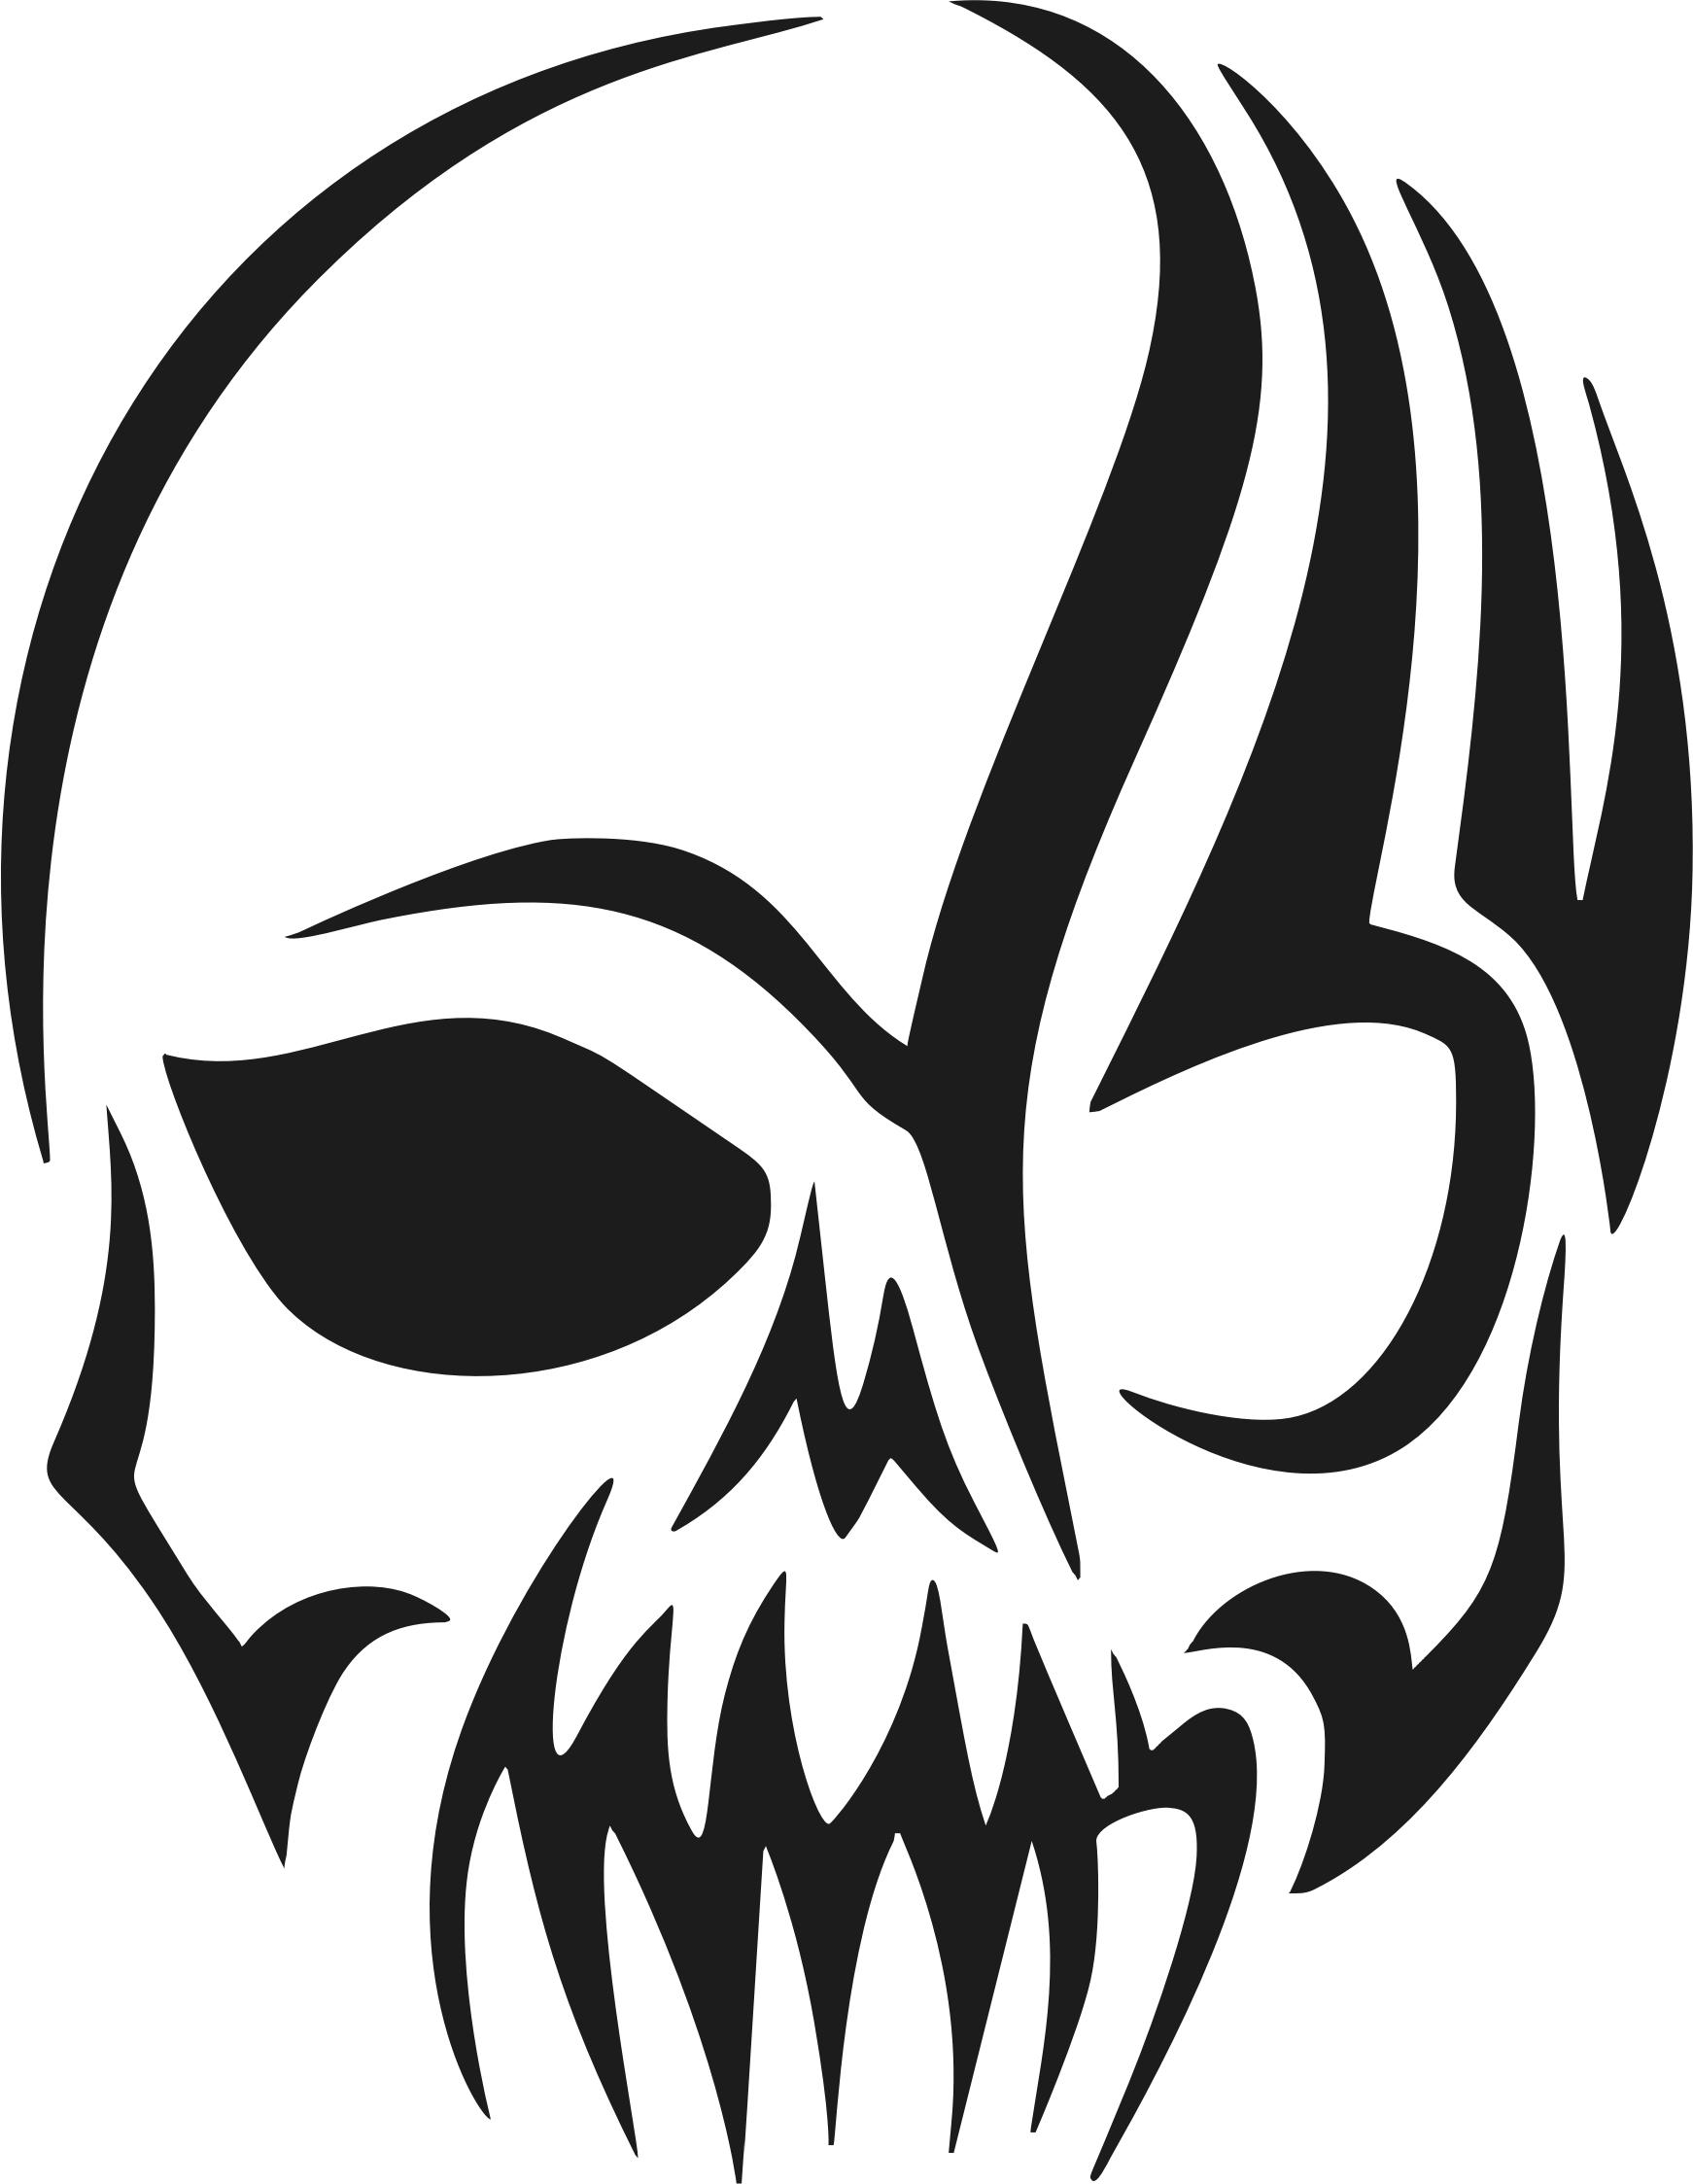 Skull Silhouette Clip Art at GetDrawings.com | Free for personal use